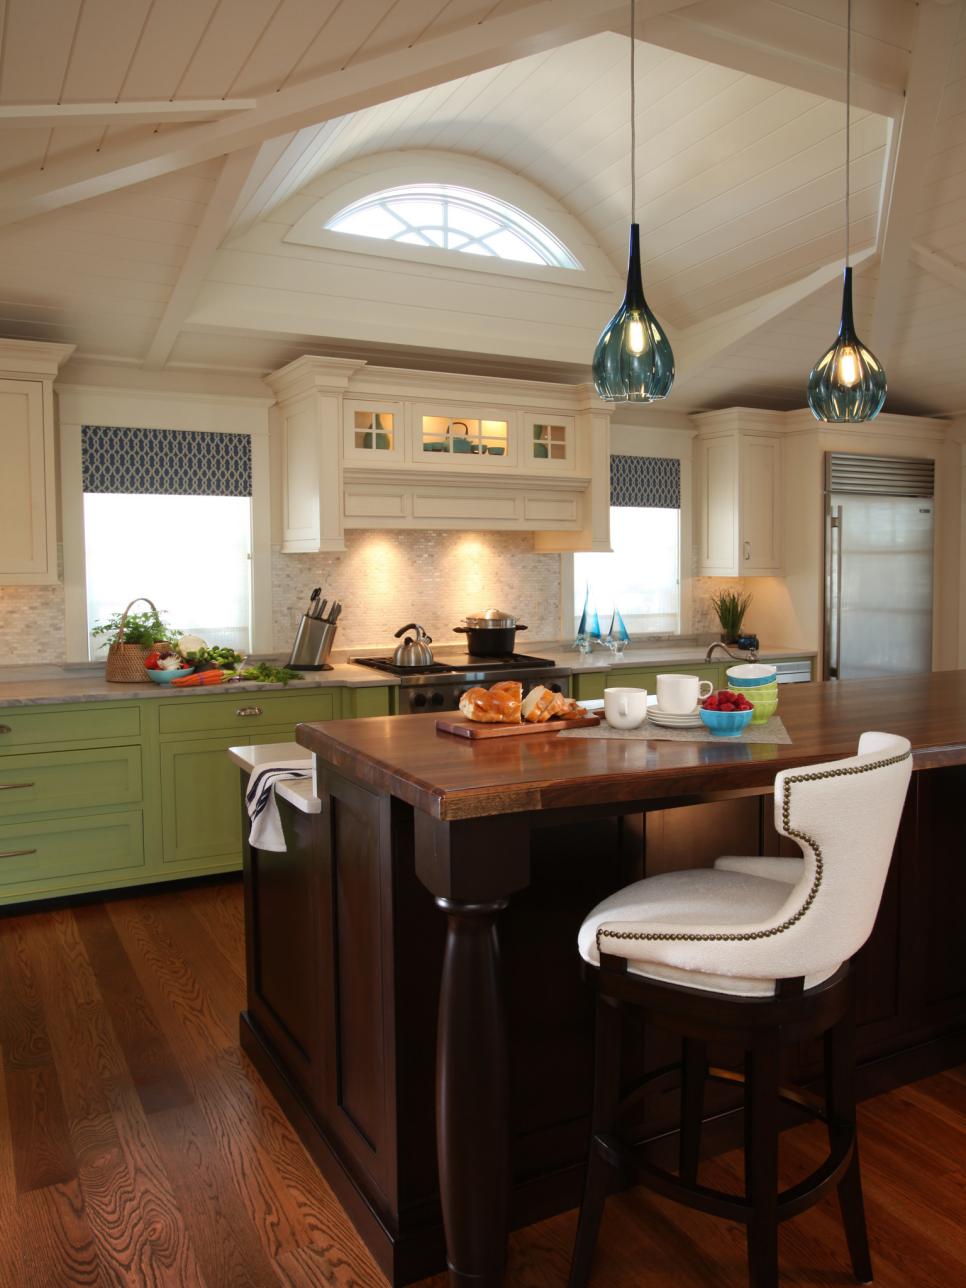 Spacious Kitchen With Wood Island and Green Cabinets | HGTV